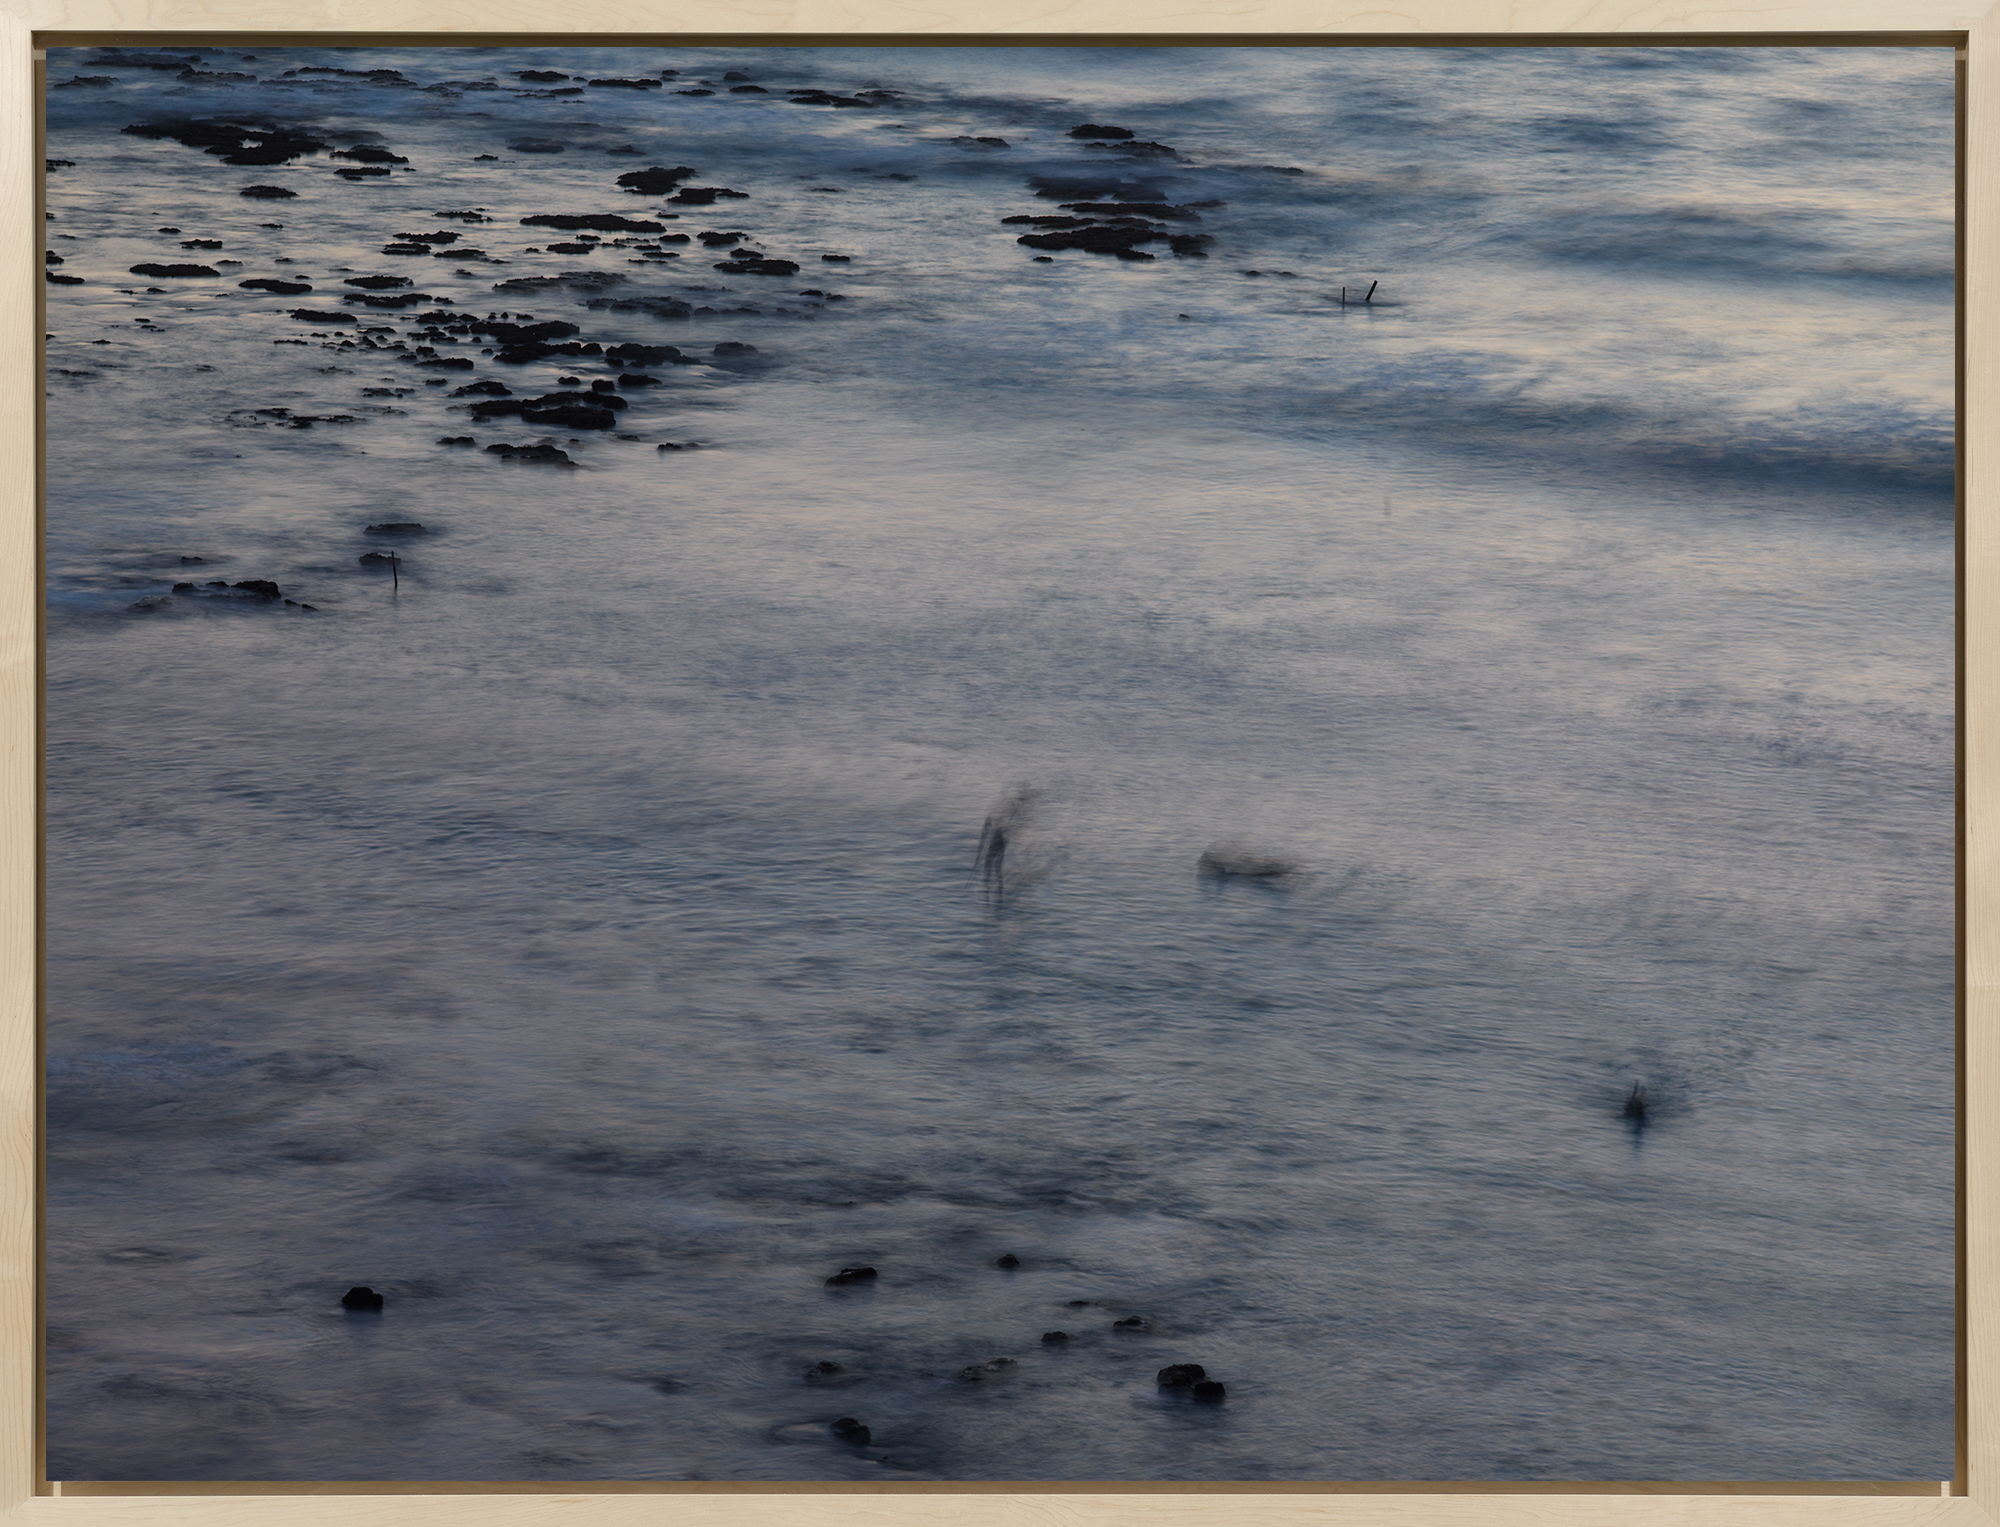 Color photograph of surfer on water with rocks and motion blur framed in bleached wood